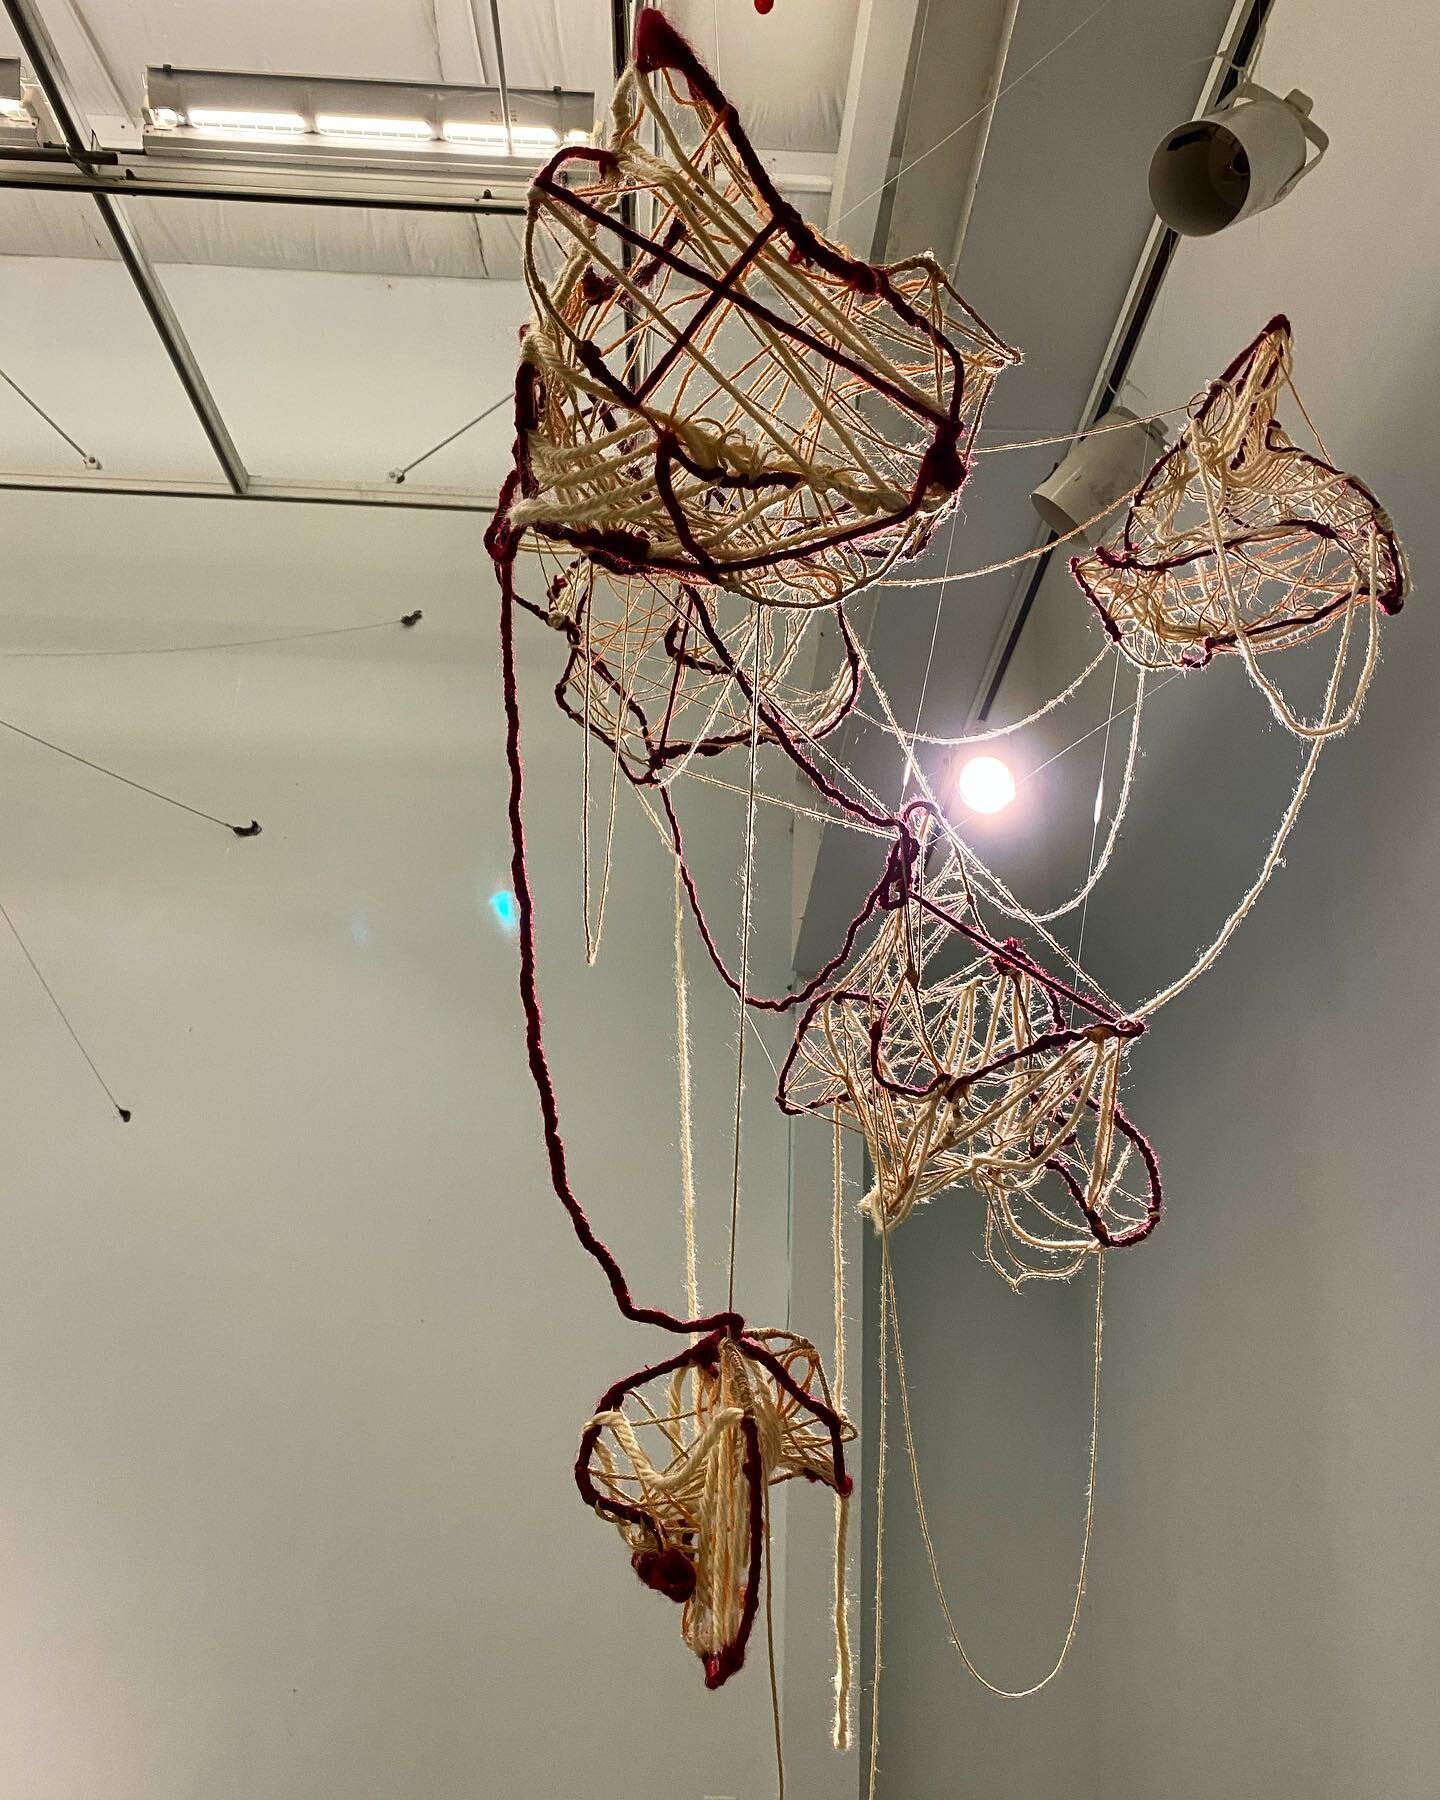 &ldquo;polyester womb&rdquo;, 2021, yarn and wire 
....

this semester was really difficult for me creatively and i started making these wire structures as a way to move my hands and get into a rhythm while thinking. the result were these interconnec